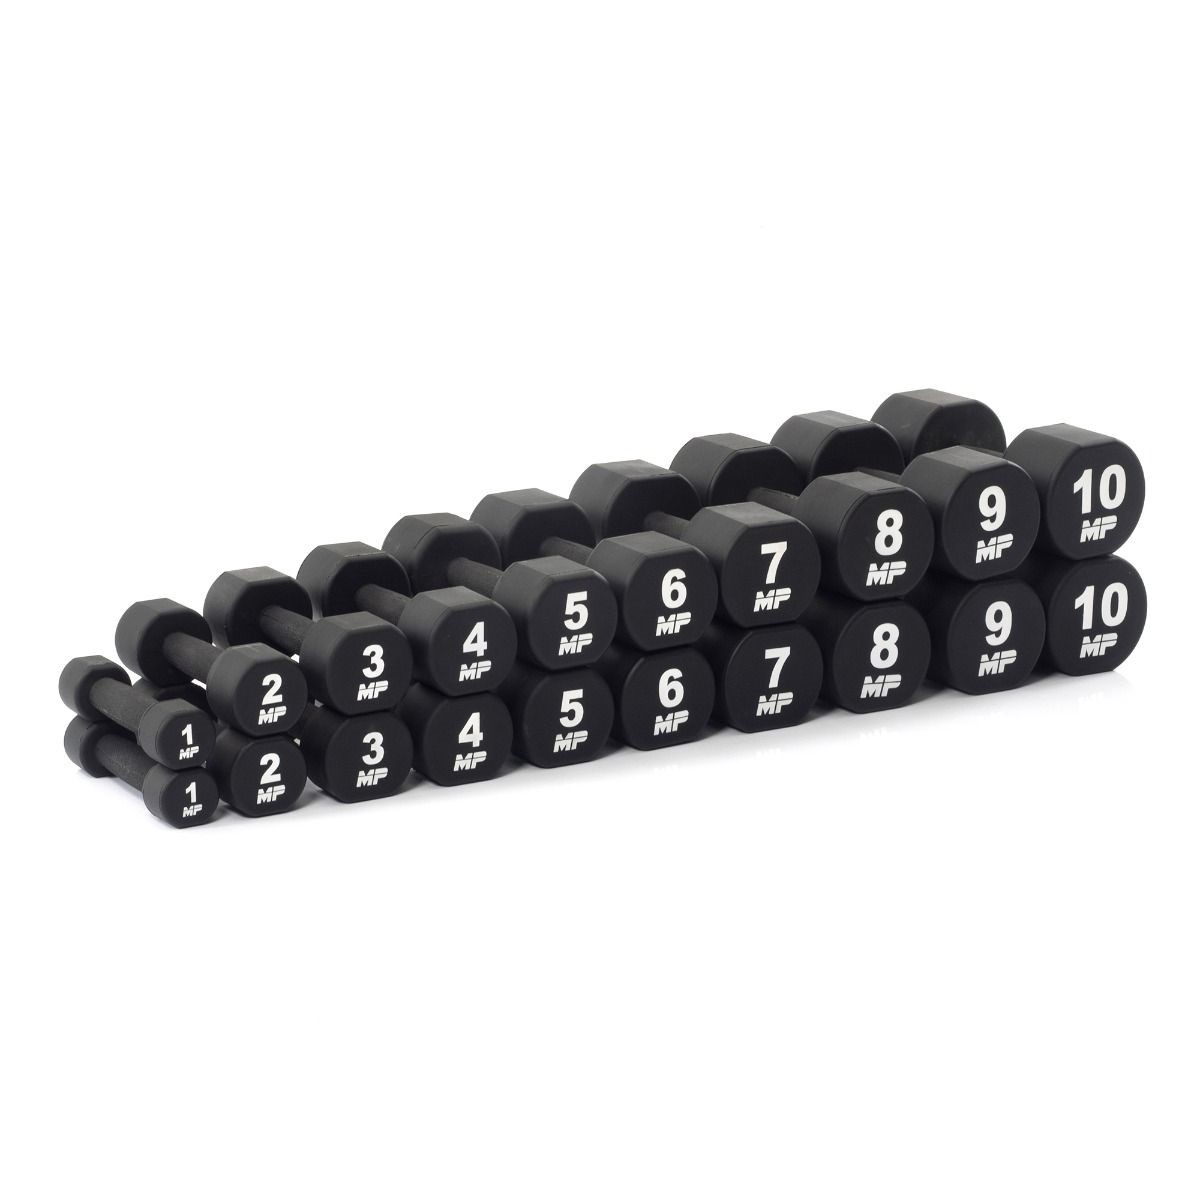 Muscle Power PU Dumbbell Set - 20 x 1-10 kg